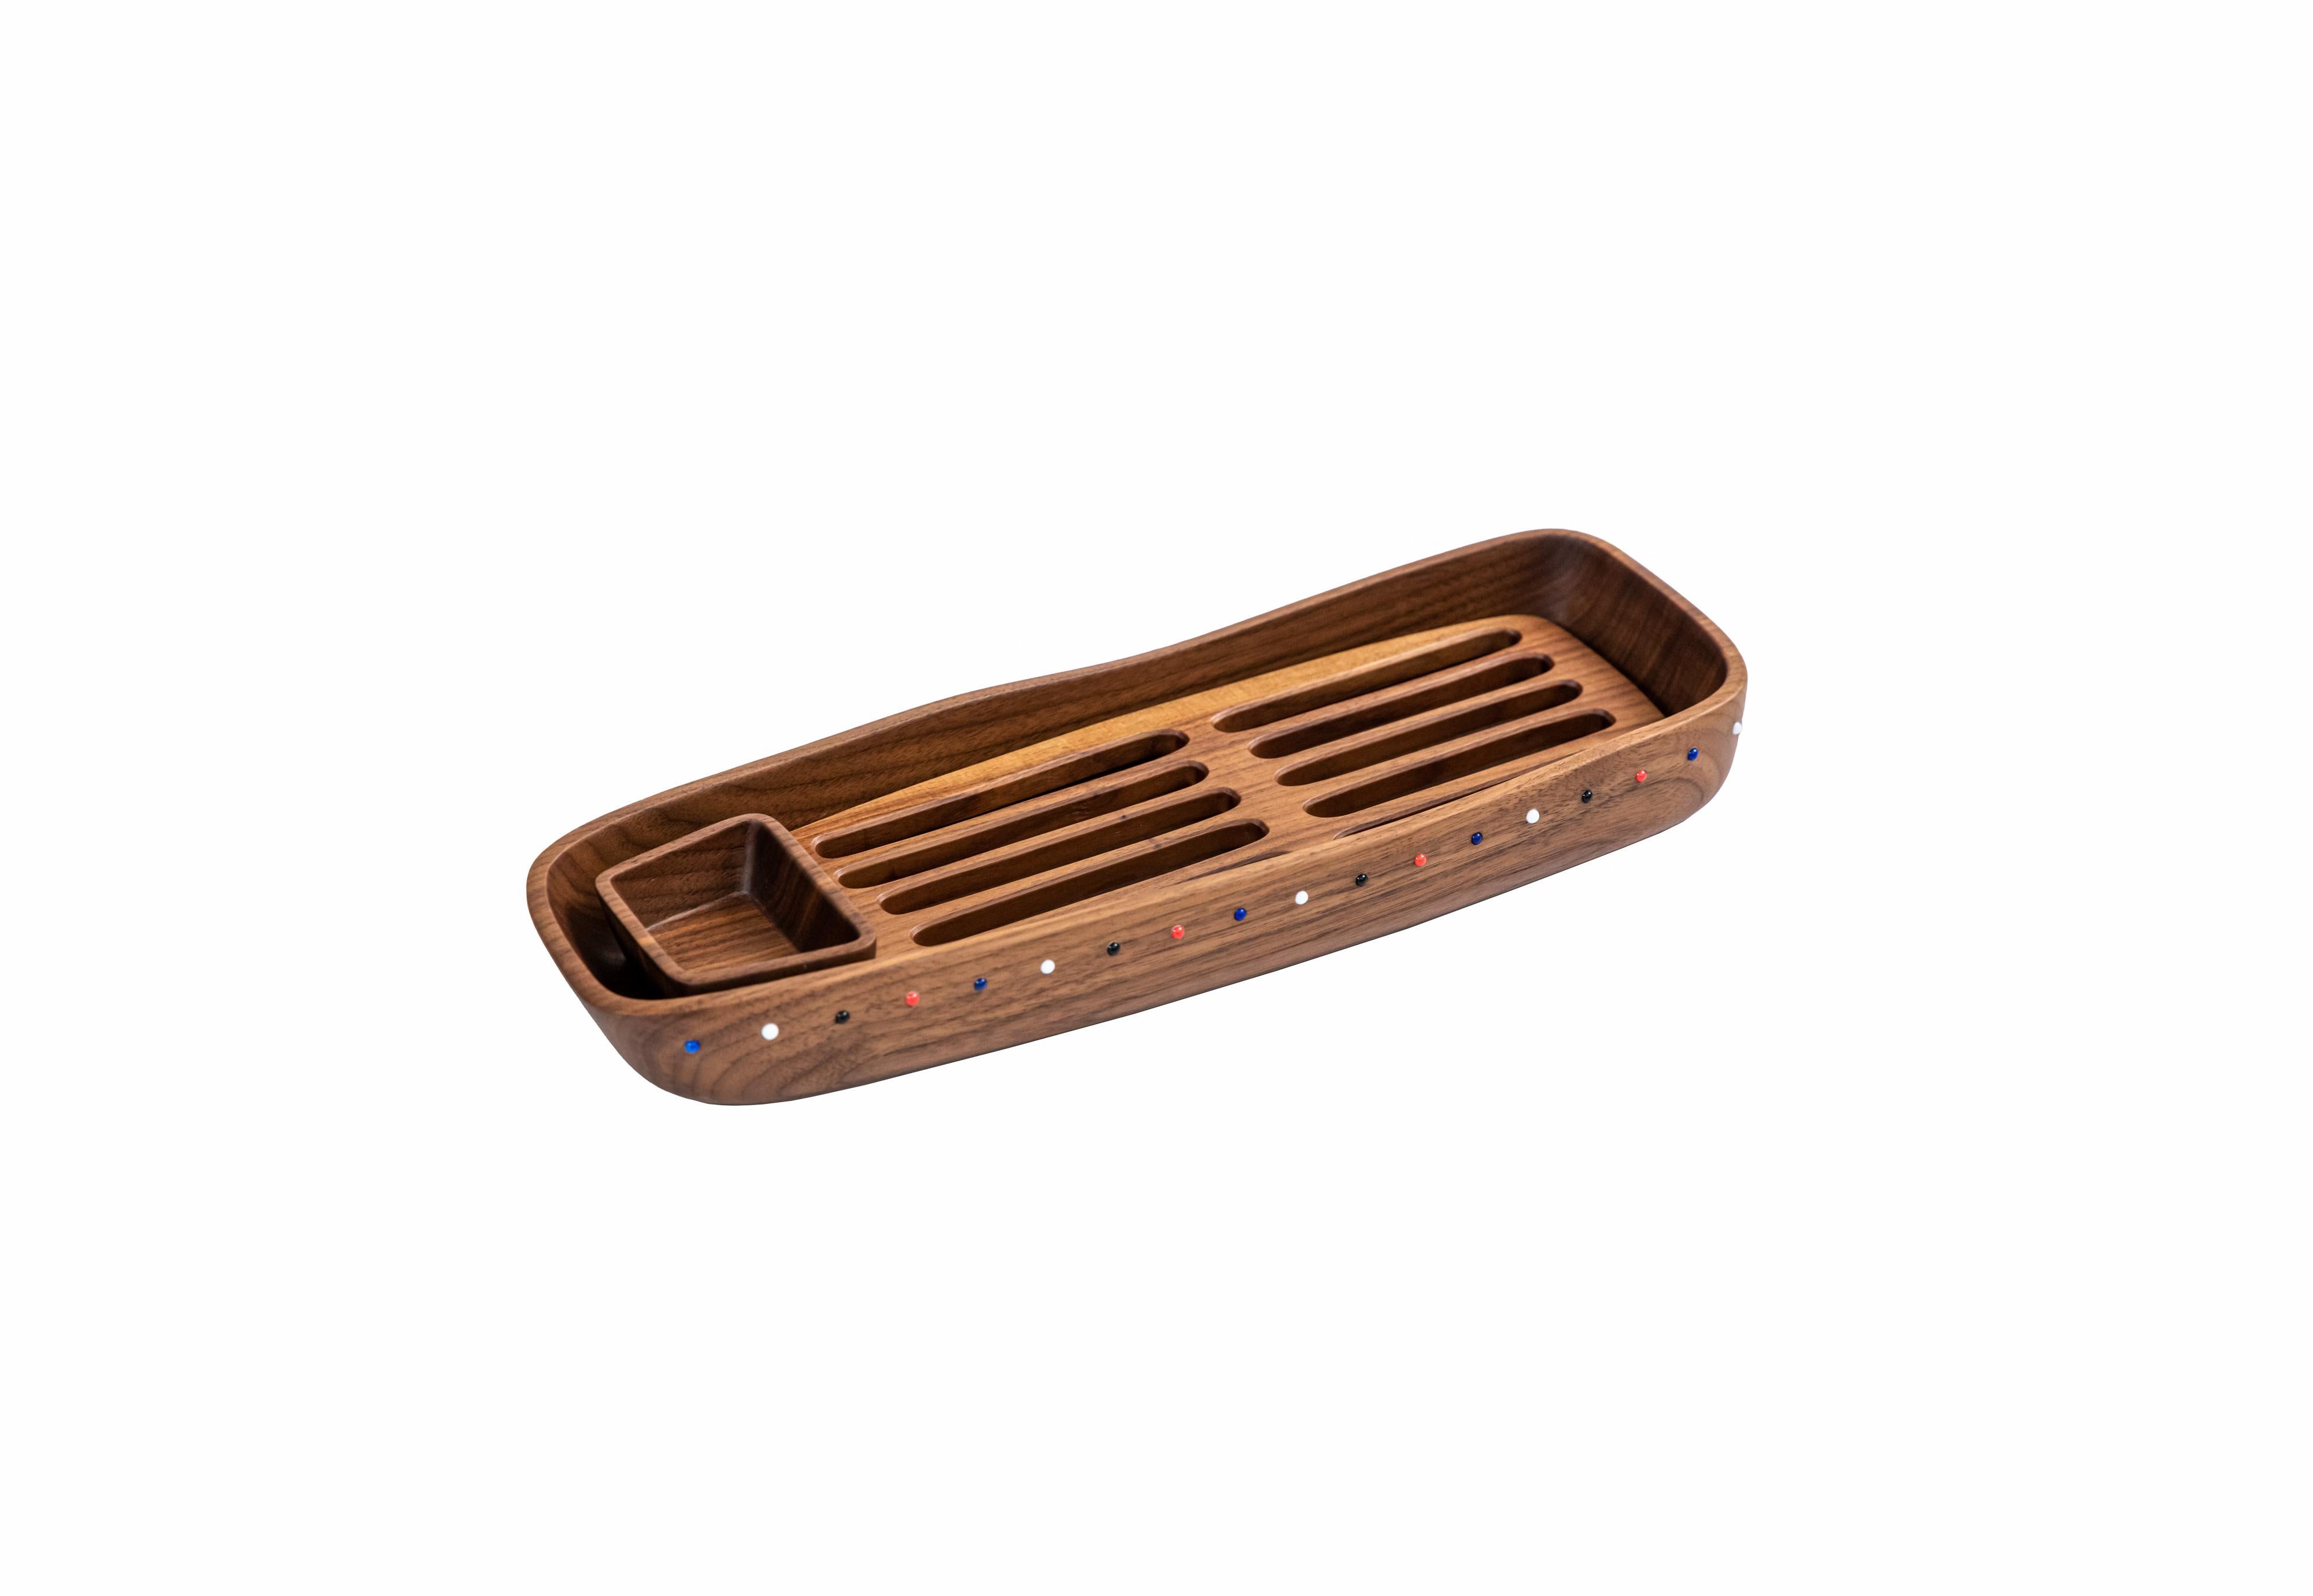 The bread board is an organically shaped wooden tray carved from one solid piece of walnut wood. It is beautifully sized with a crumb catcher and a small bowl for olive oil or dips. The embedded glass pearl bead decoration is a signature of the